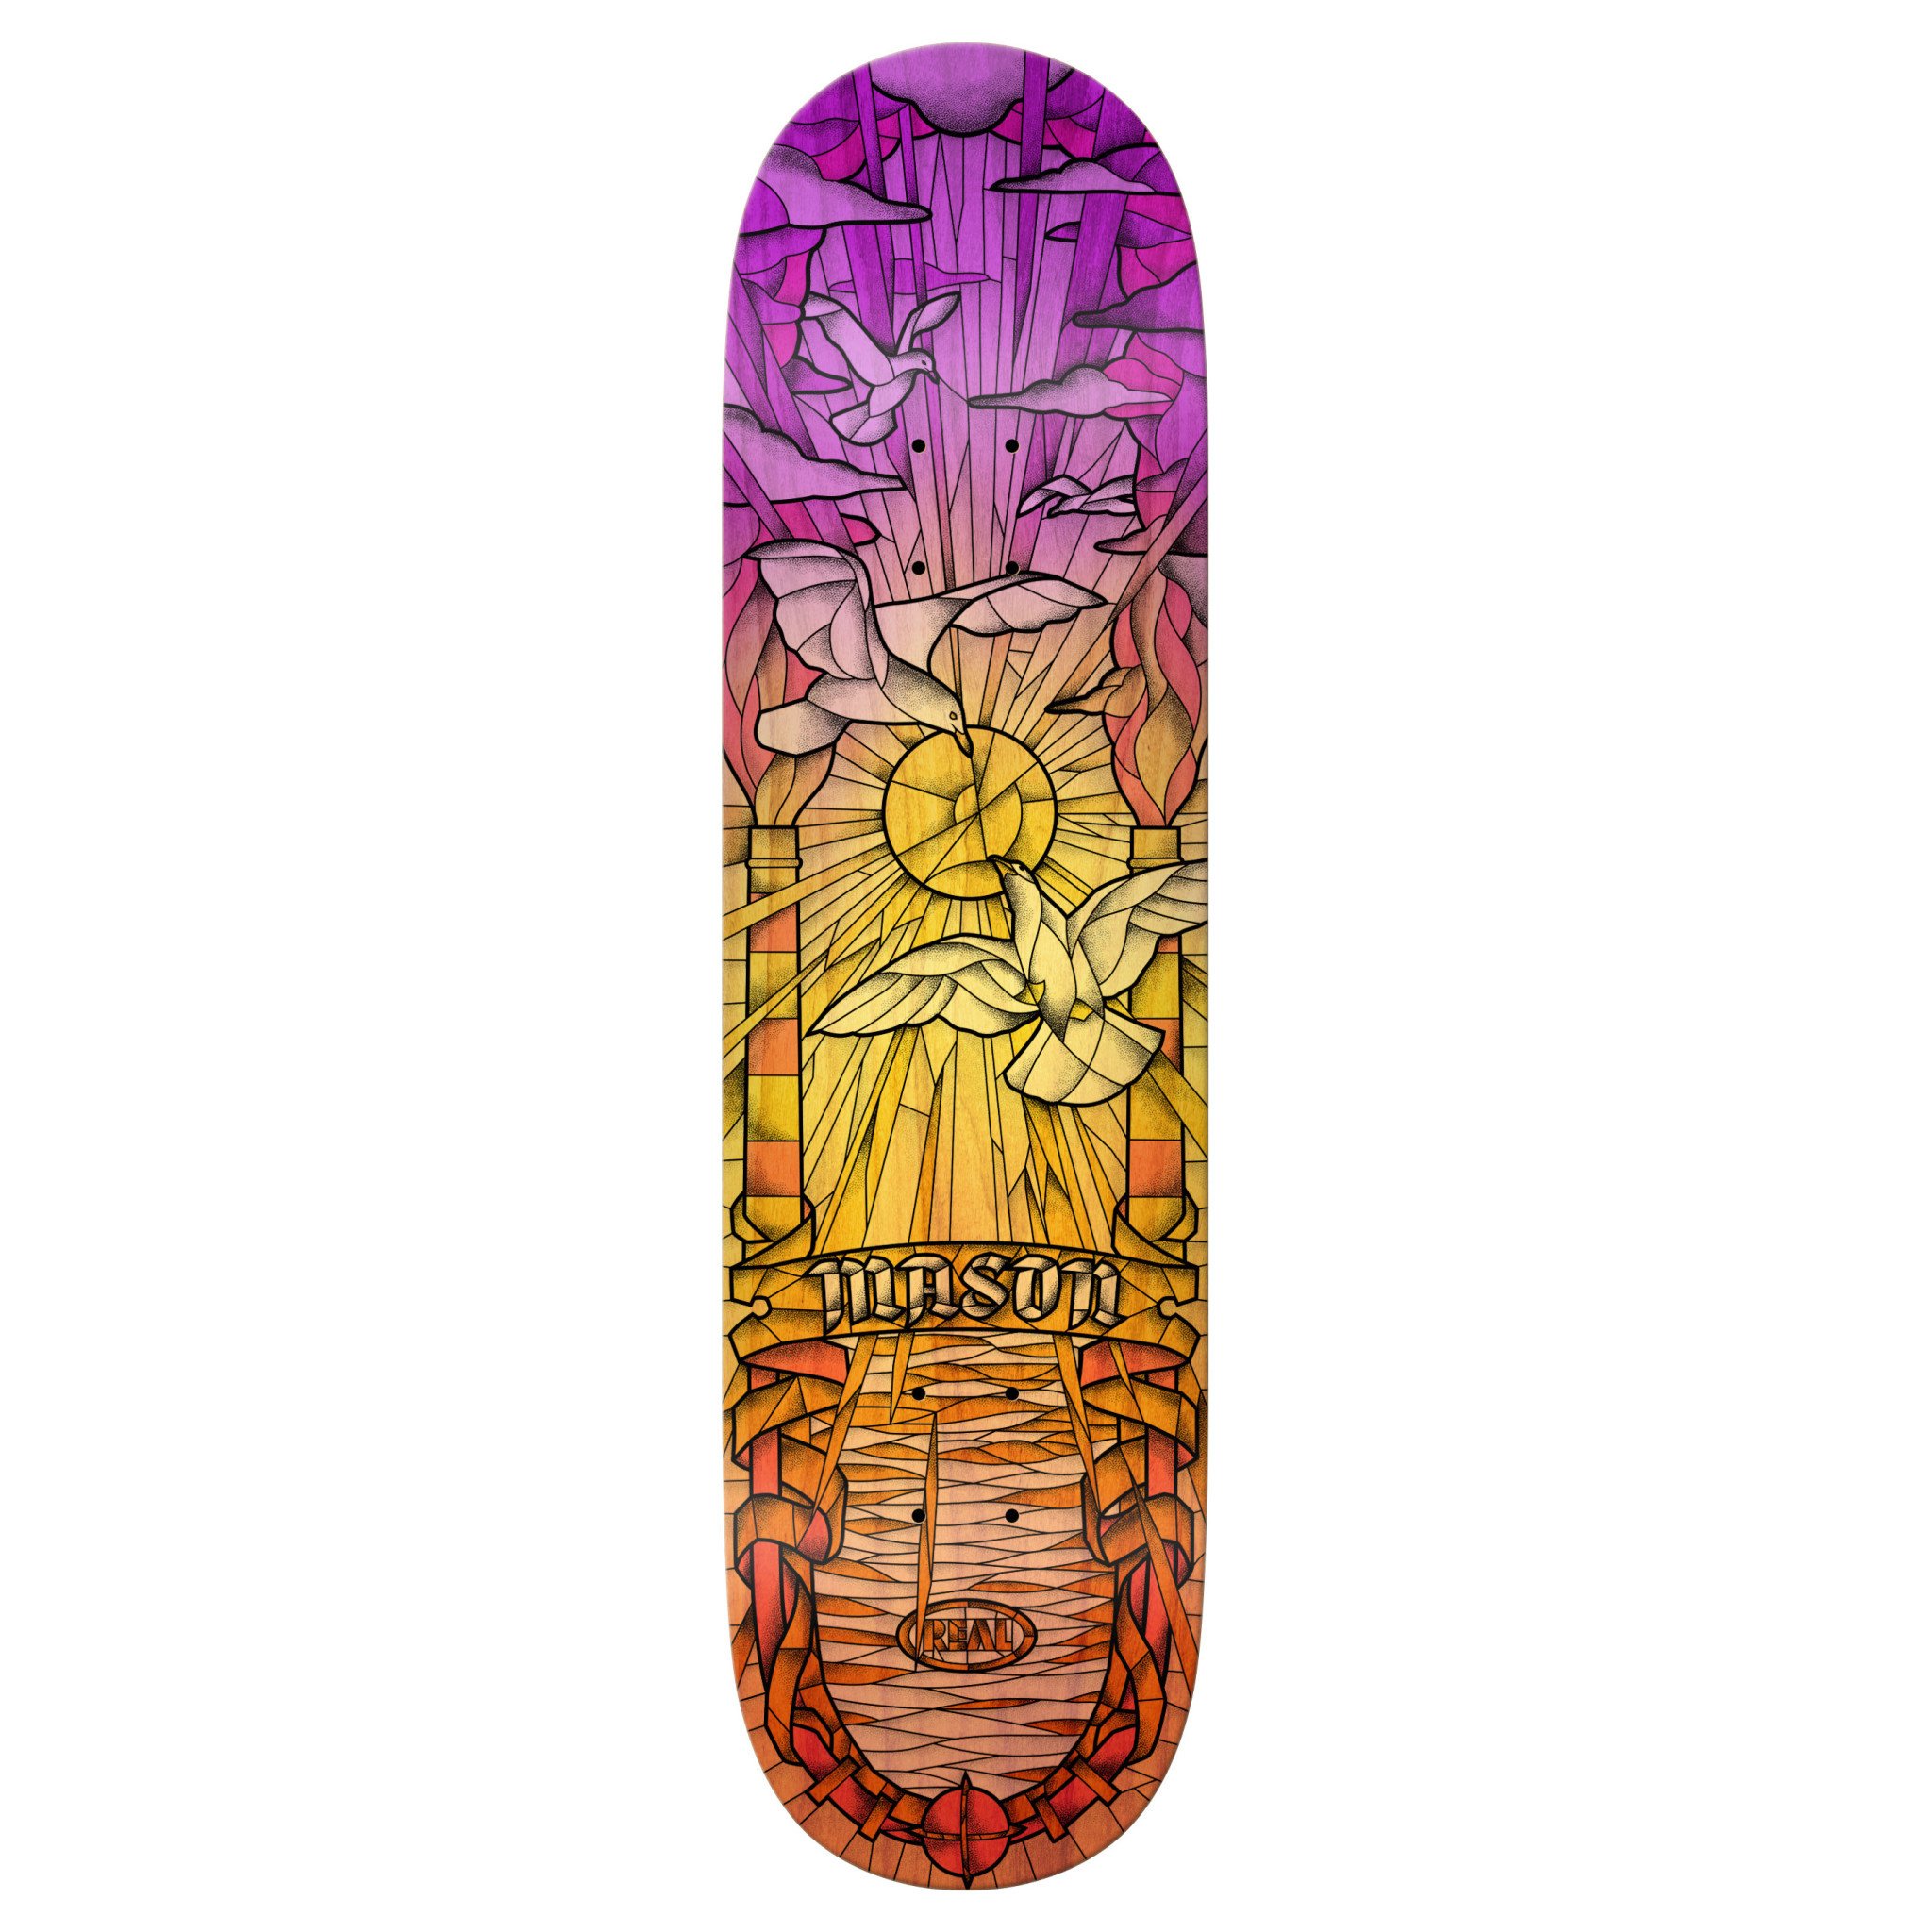 Real Skateboards Mason Chromatic Cathedral 8.38